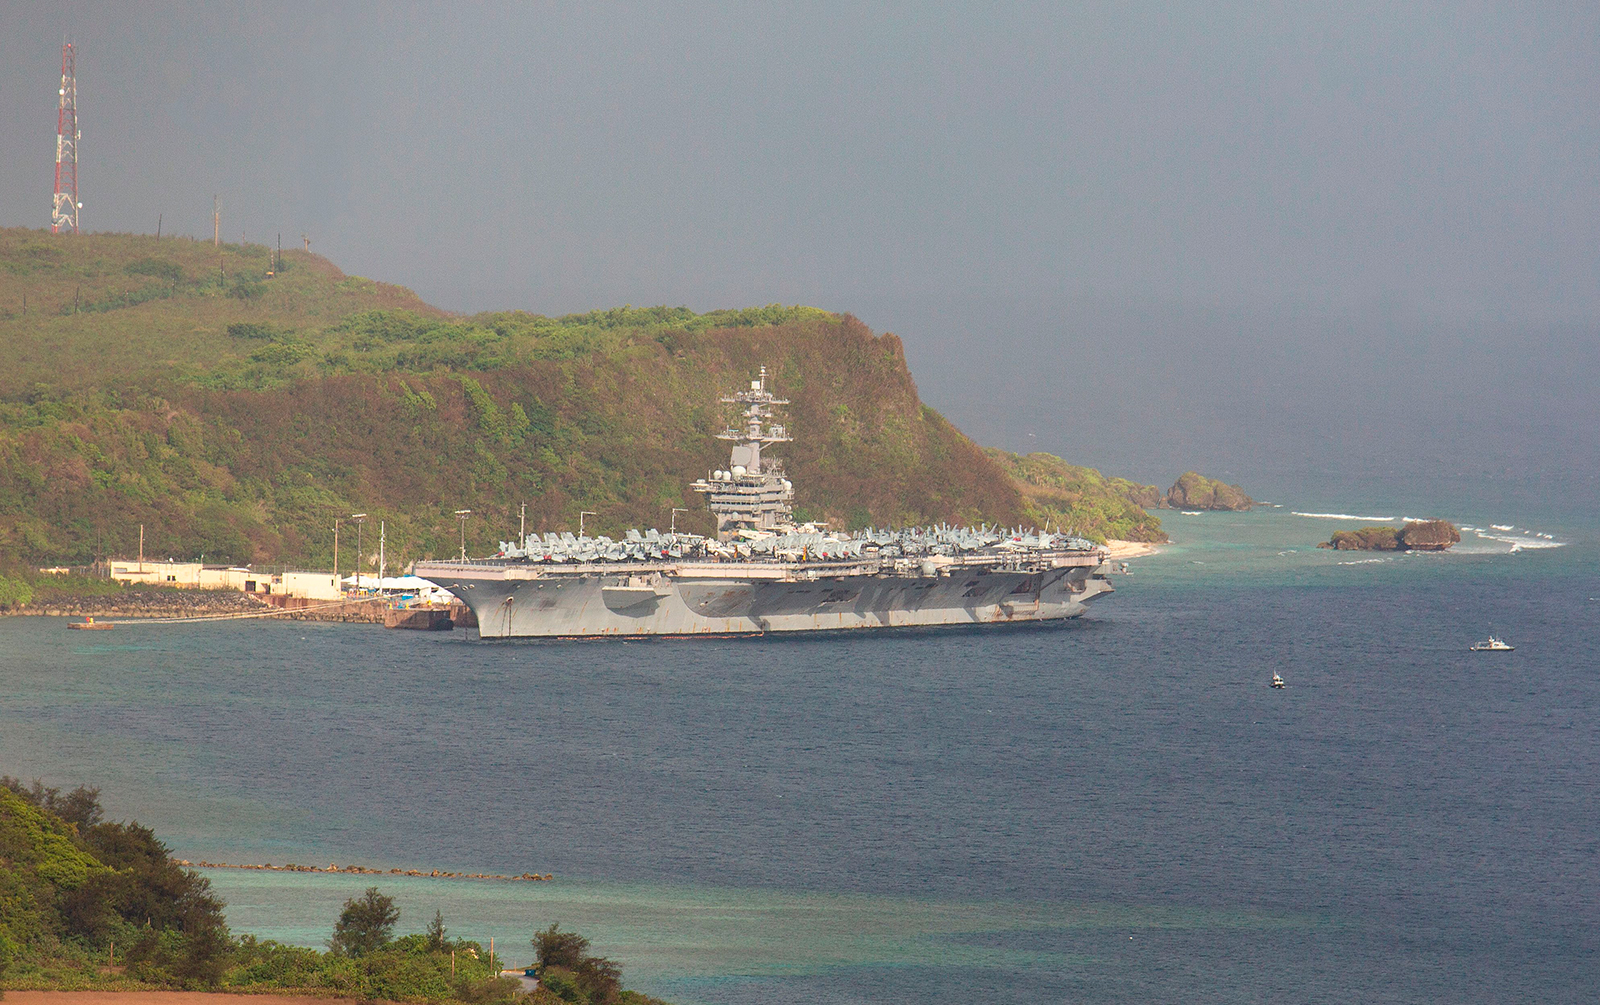 The aircraft carrier USS Theodore Roosevelt is docked at Naval Base Guam in Apra Harbor on Monday, April 27.